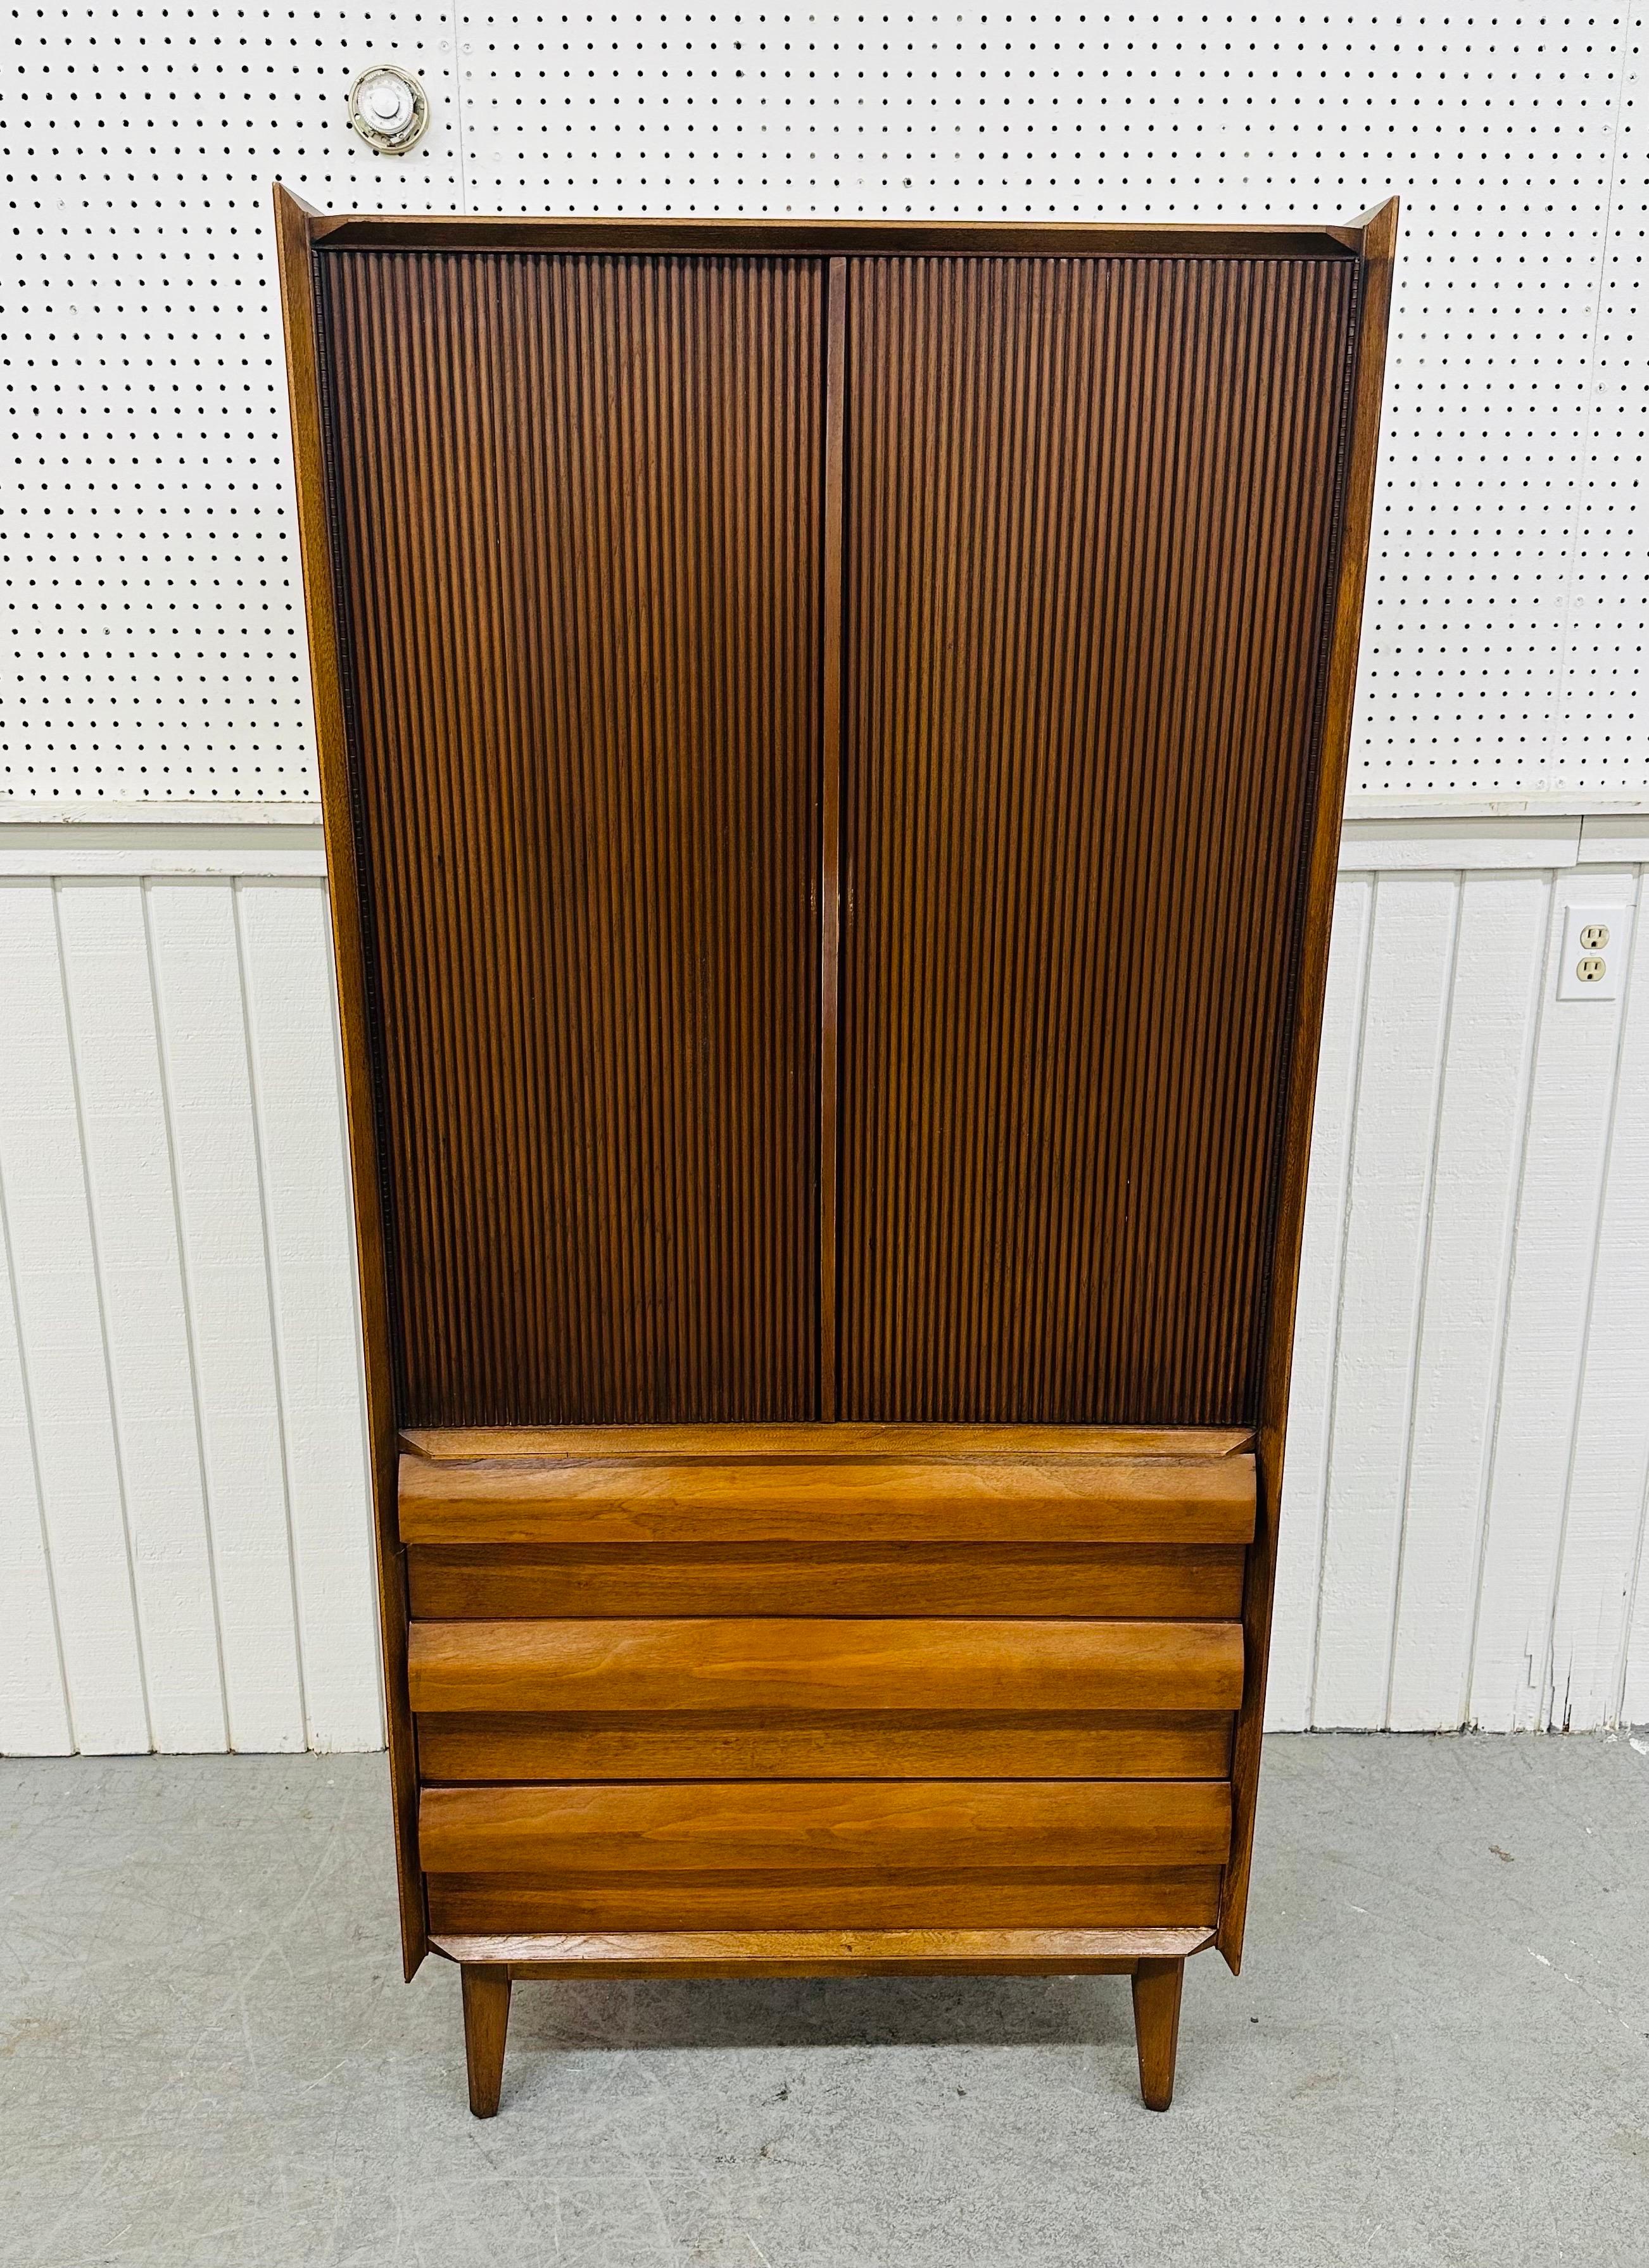 This listing is for a Mid-Century Modern Lane “1st Edition” Walnut Armoire. Featuring a straight line design, two large reeded style doors that open up to storage space, the interior doors have a mirror on the left side and tie organizer on the